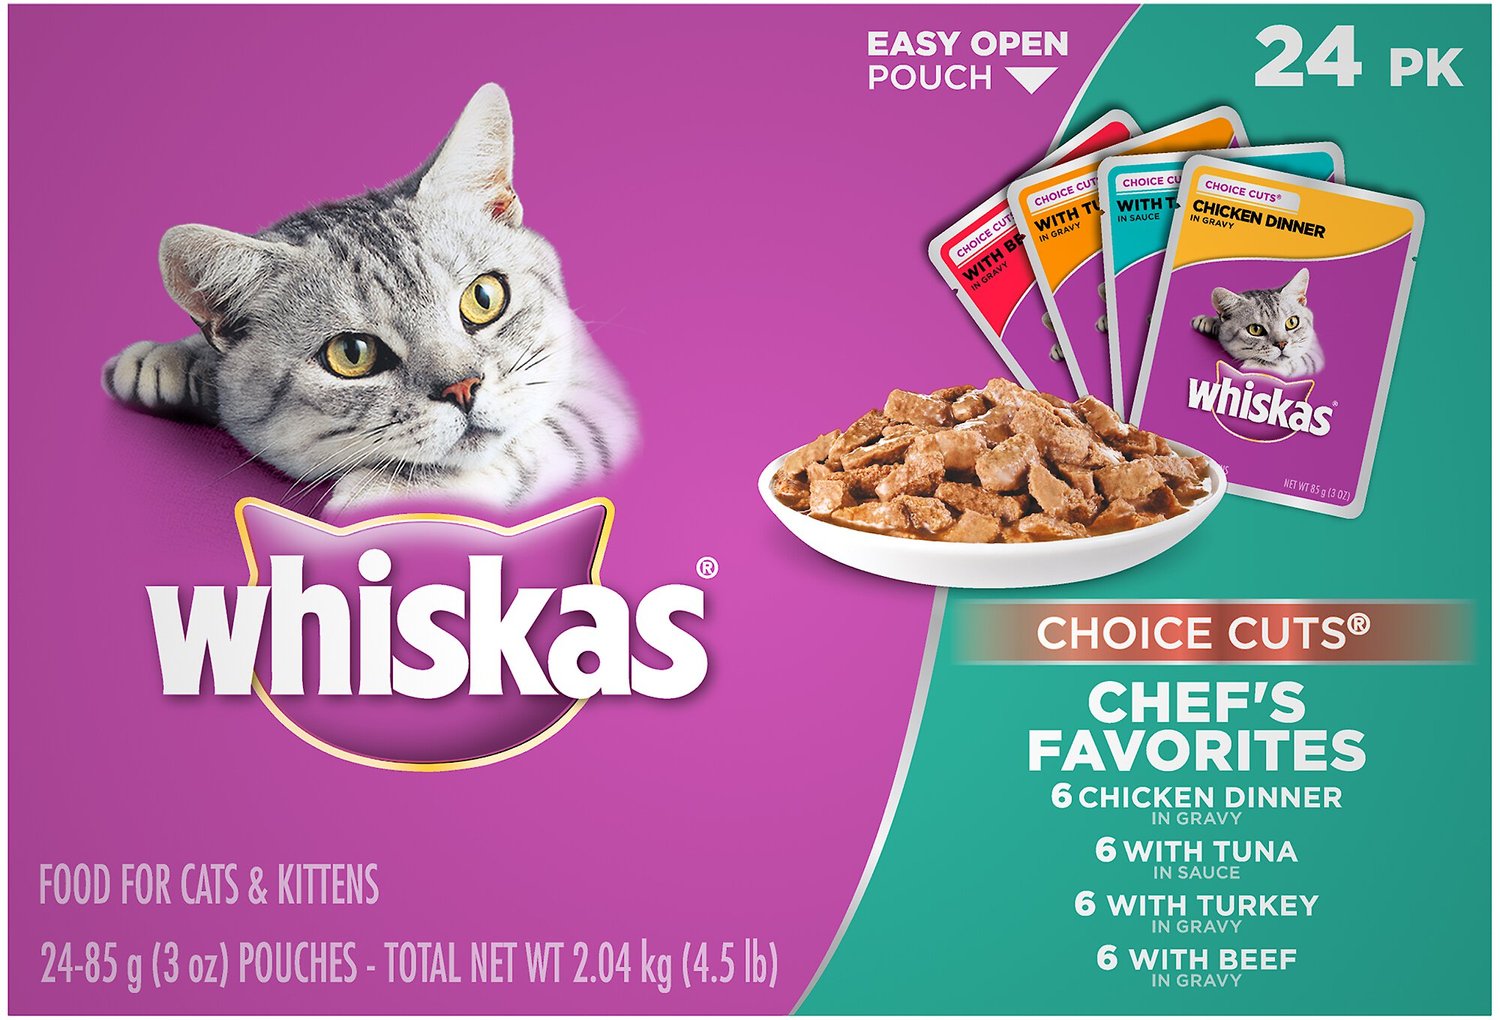 Are Whiskas Cat Food Pouches Recyclable